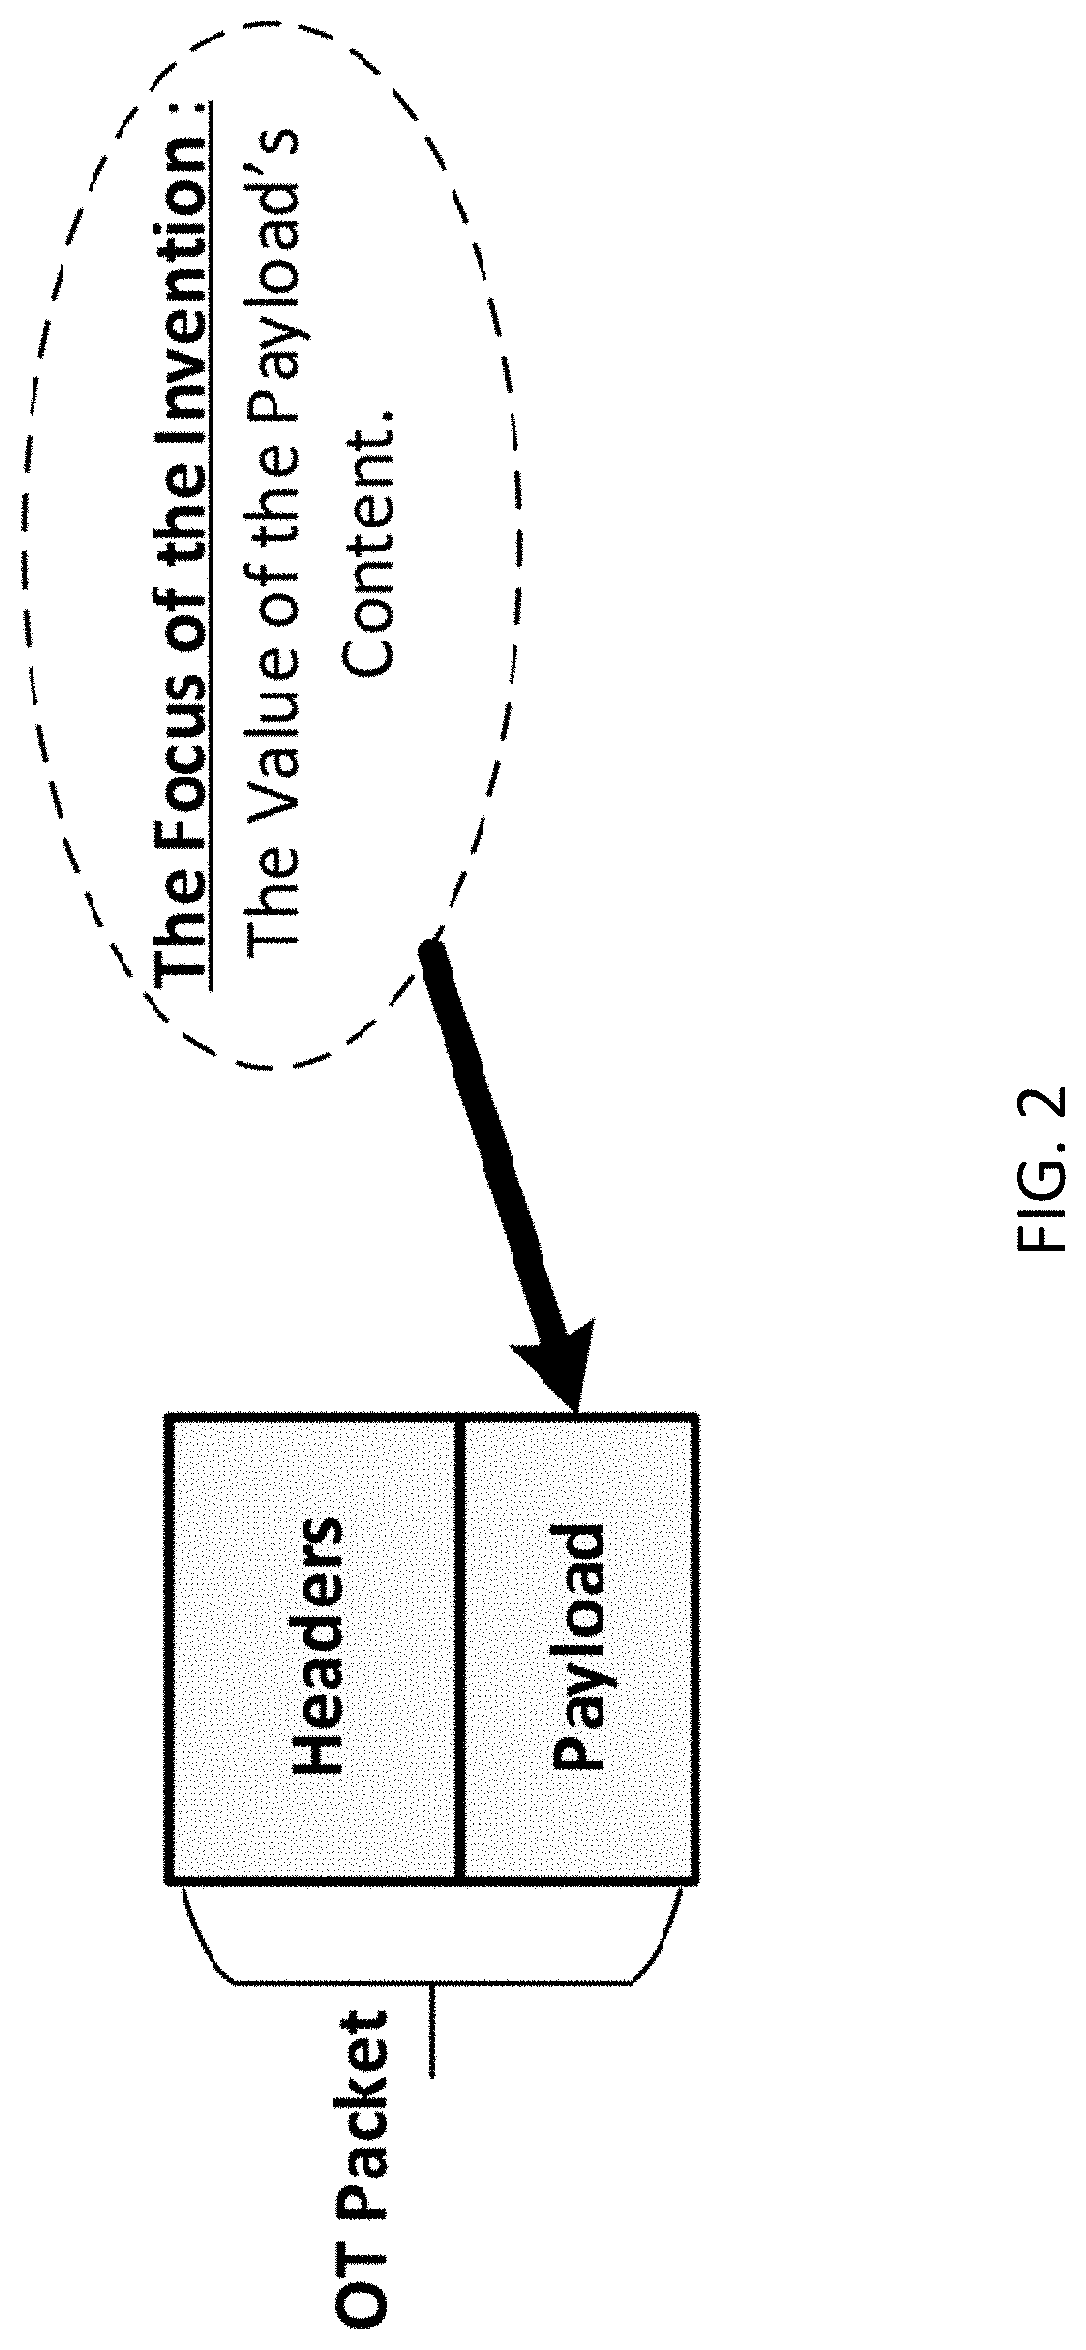 Methods and systems for detection of man-in-the-middle attacks for SCADA communication networks and applications of same